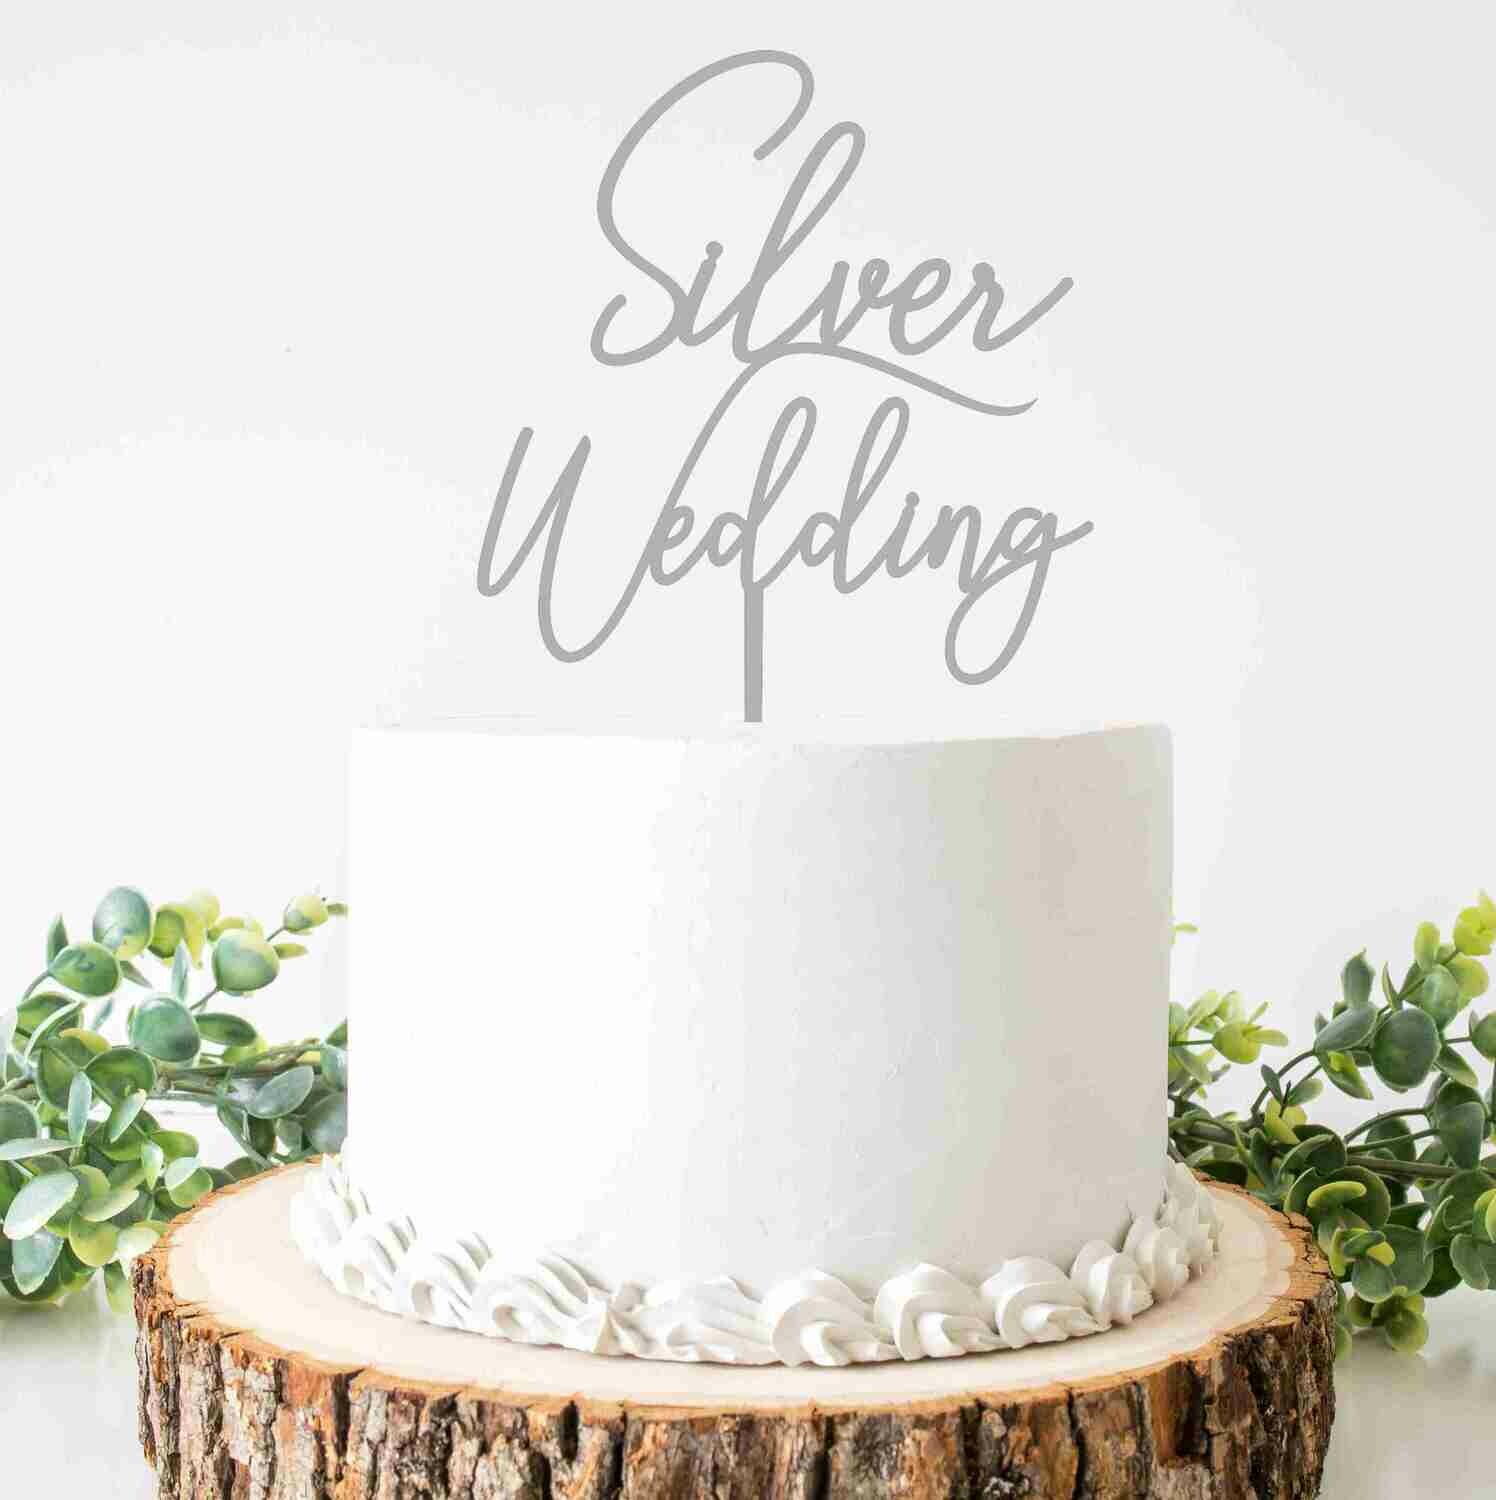 Silver and blue cake. Feed 50 people. – Chefjhoanes